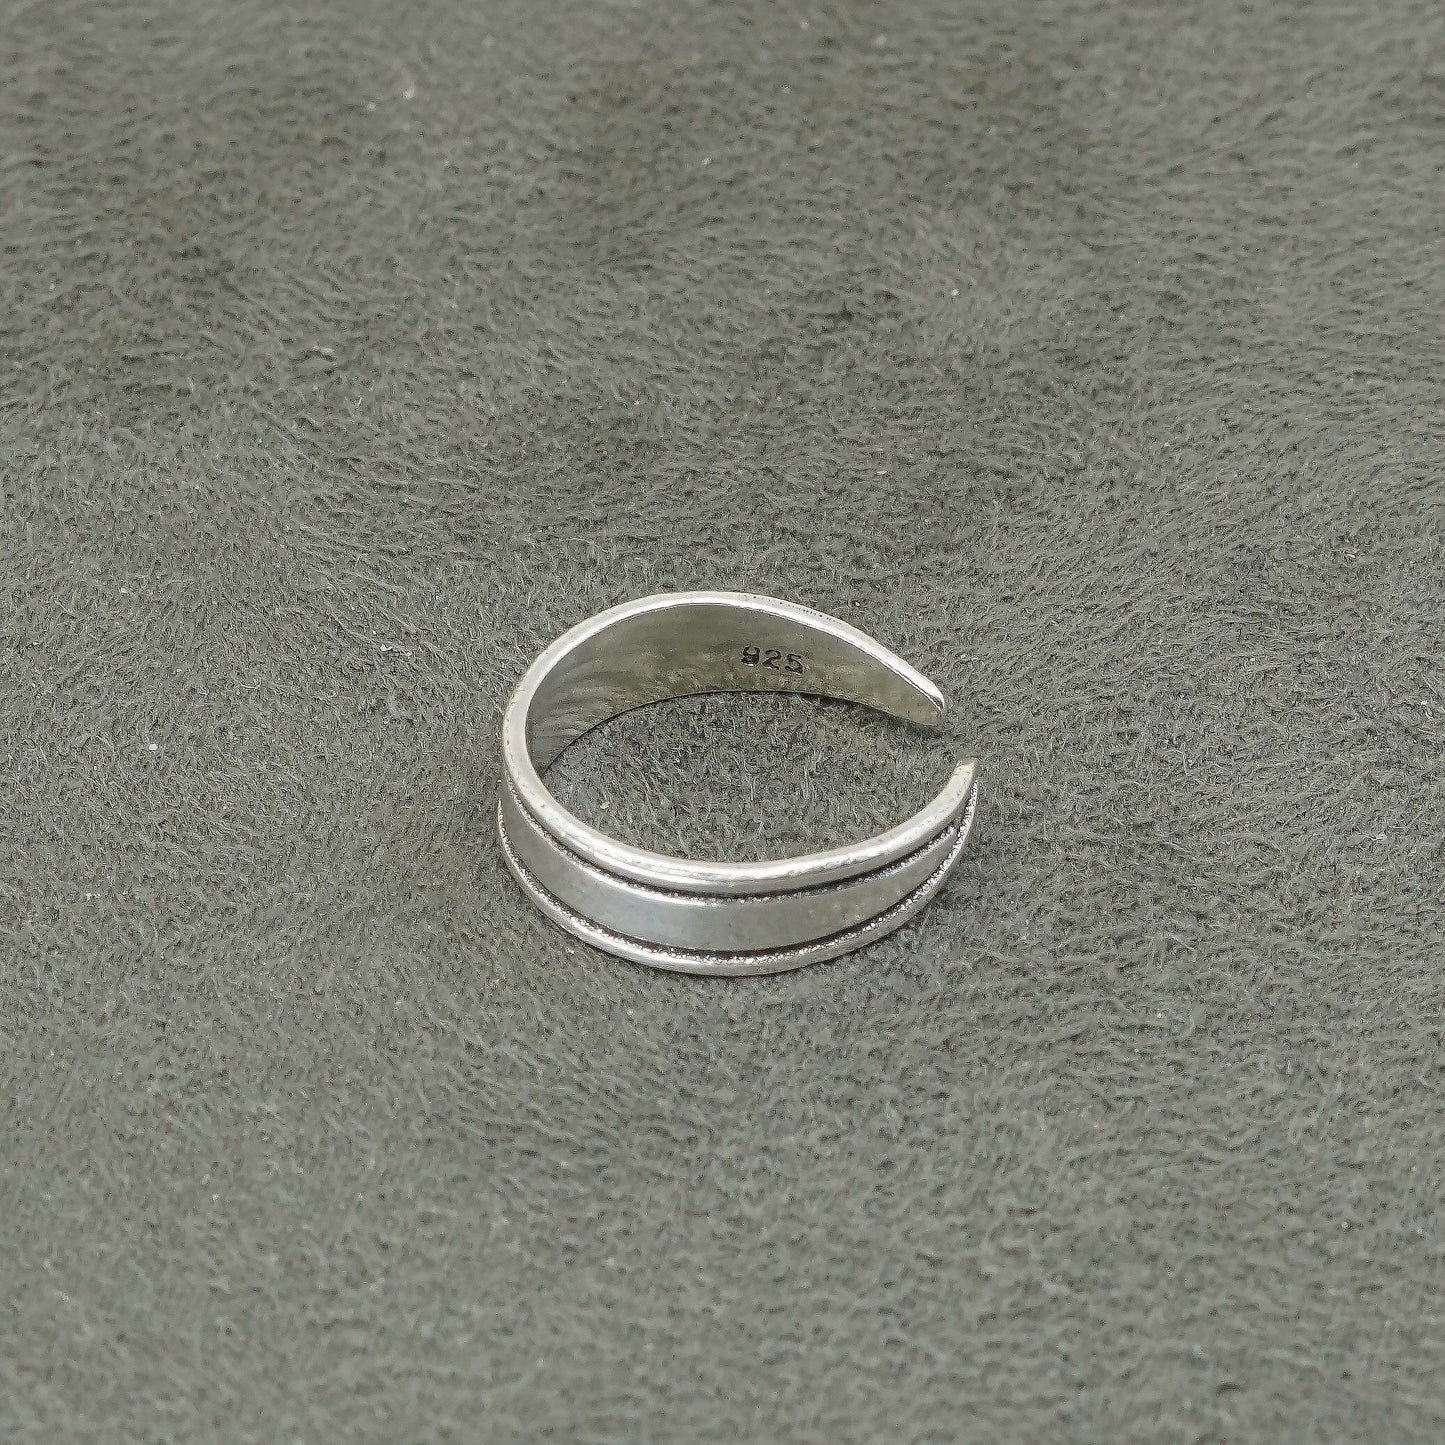 sz 2.75, vtg Sterling silver handmade ring, solid 925 silver band